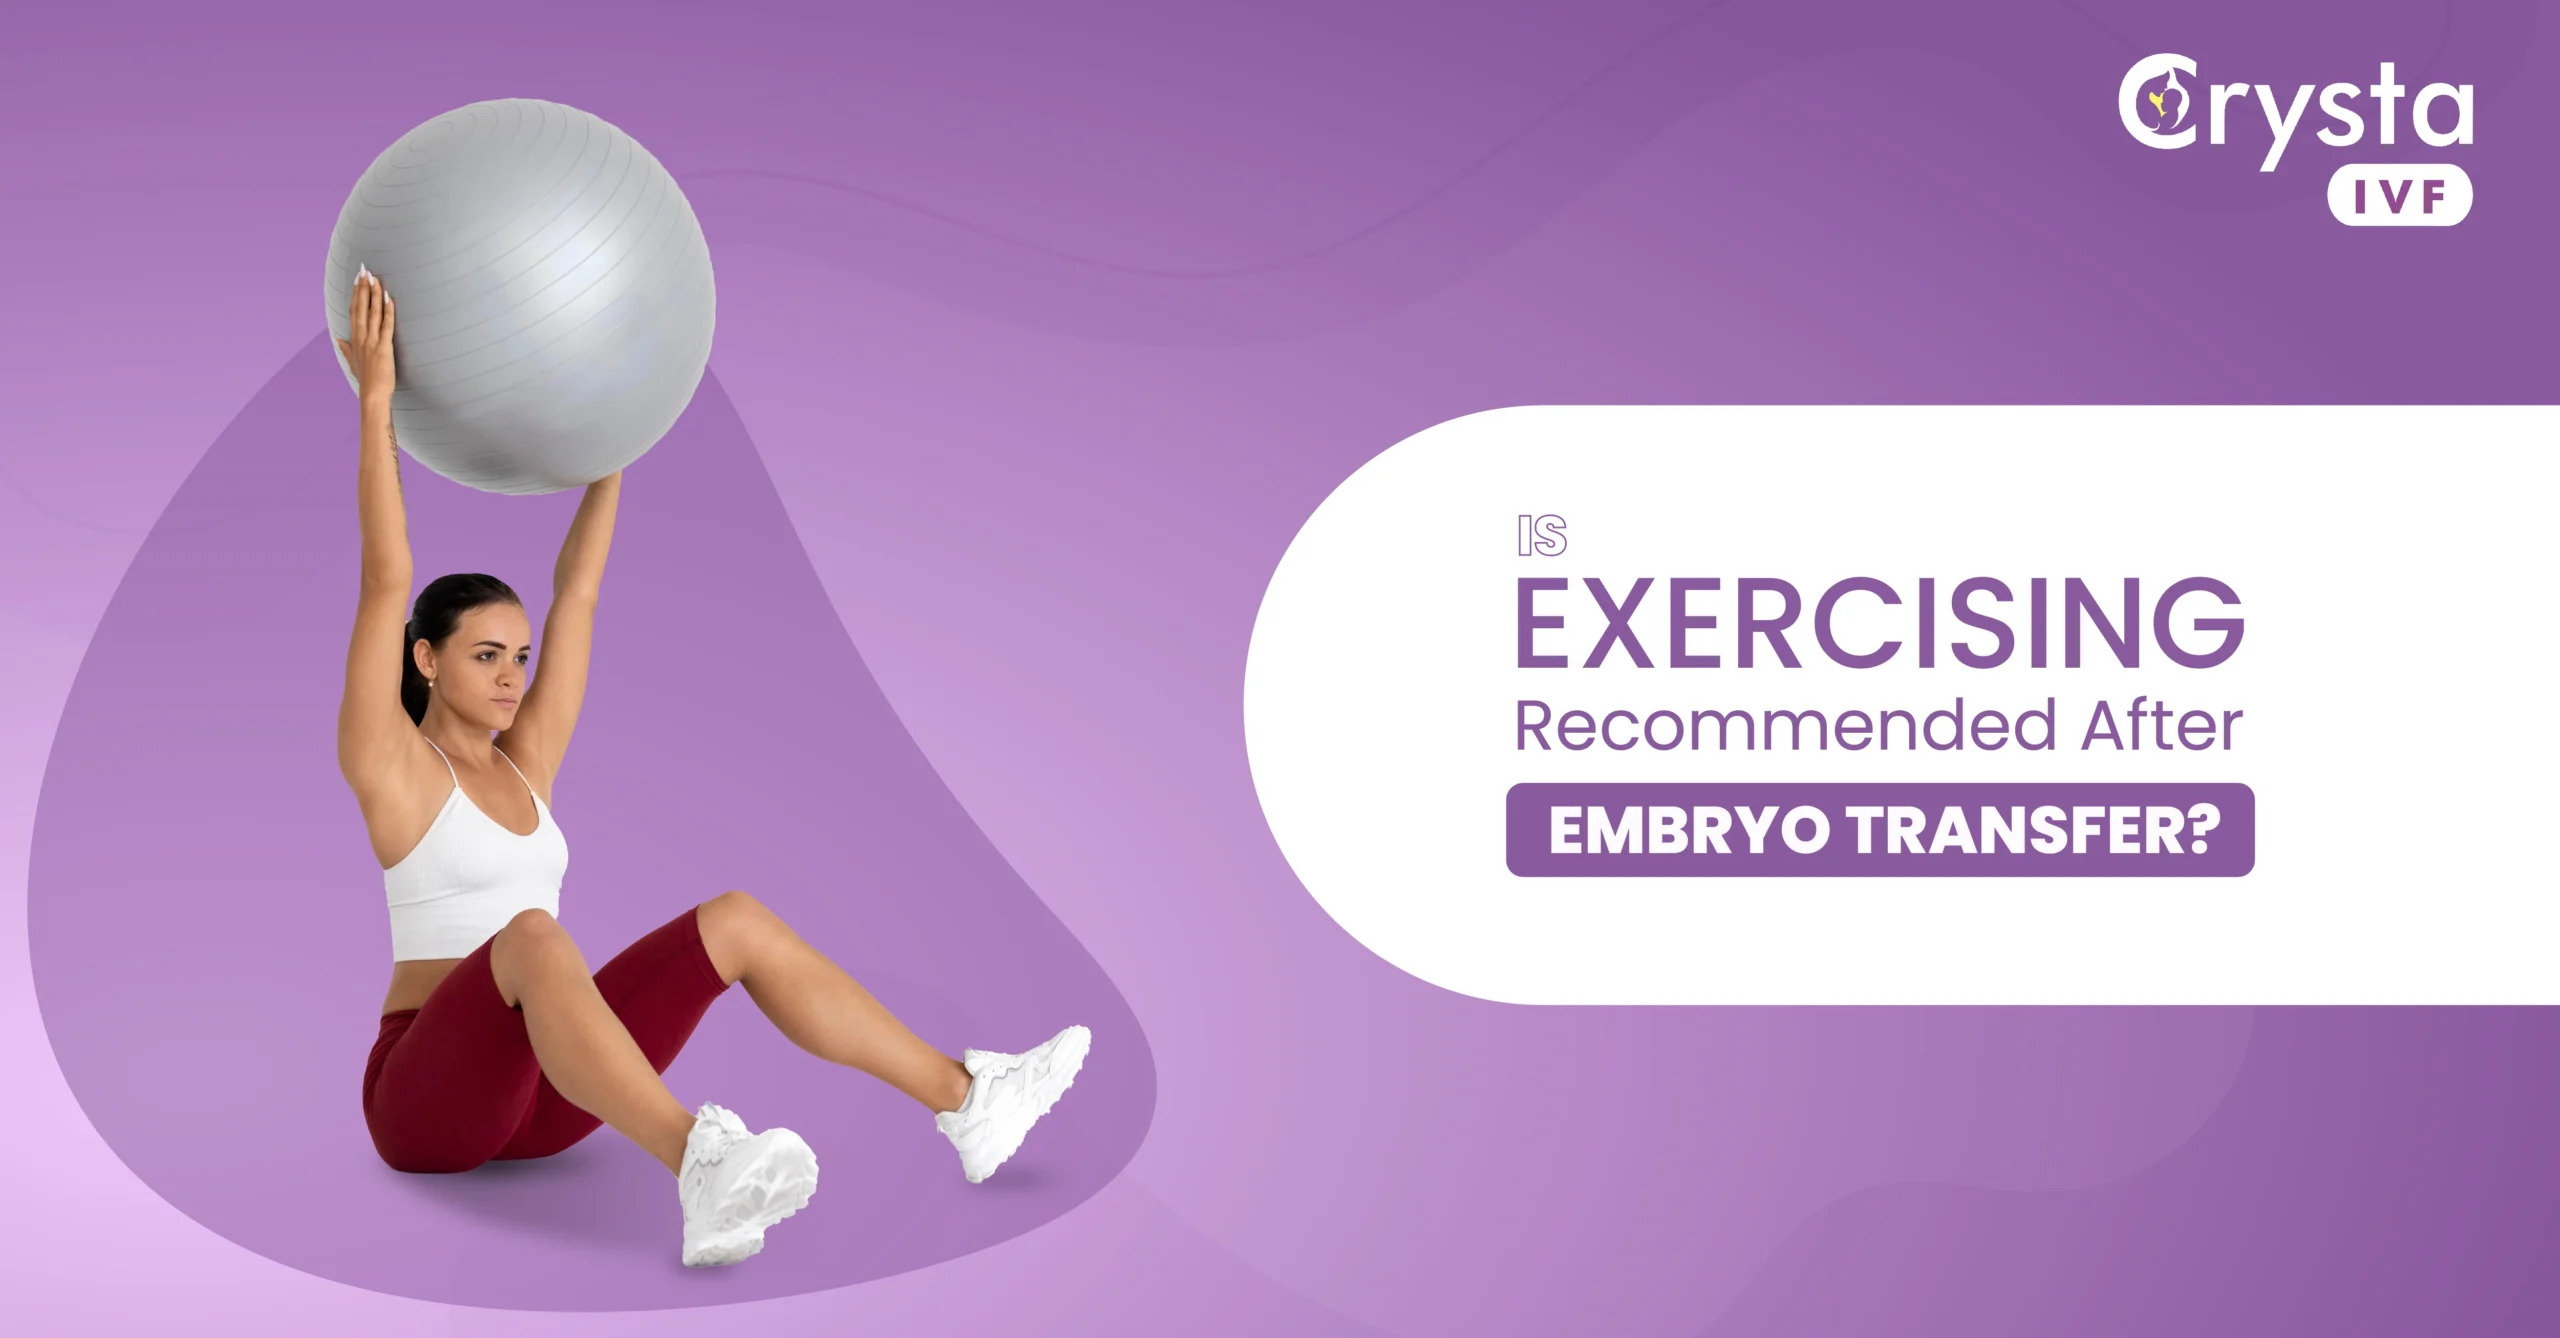 is exercising recommended during and after embryo transfer